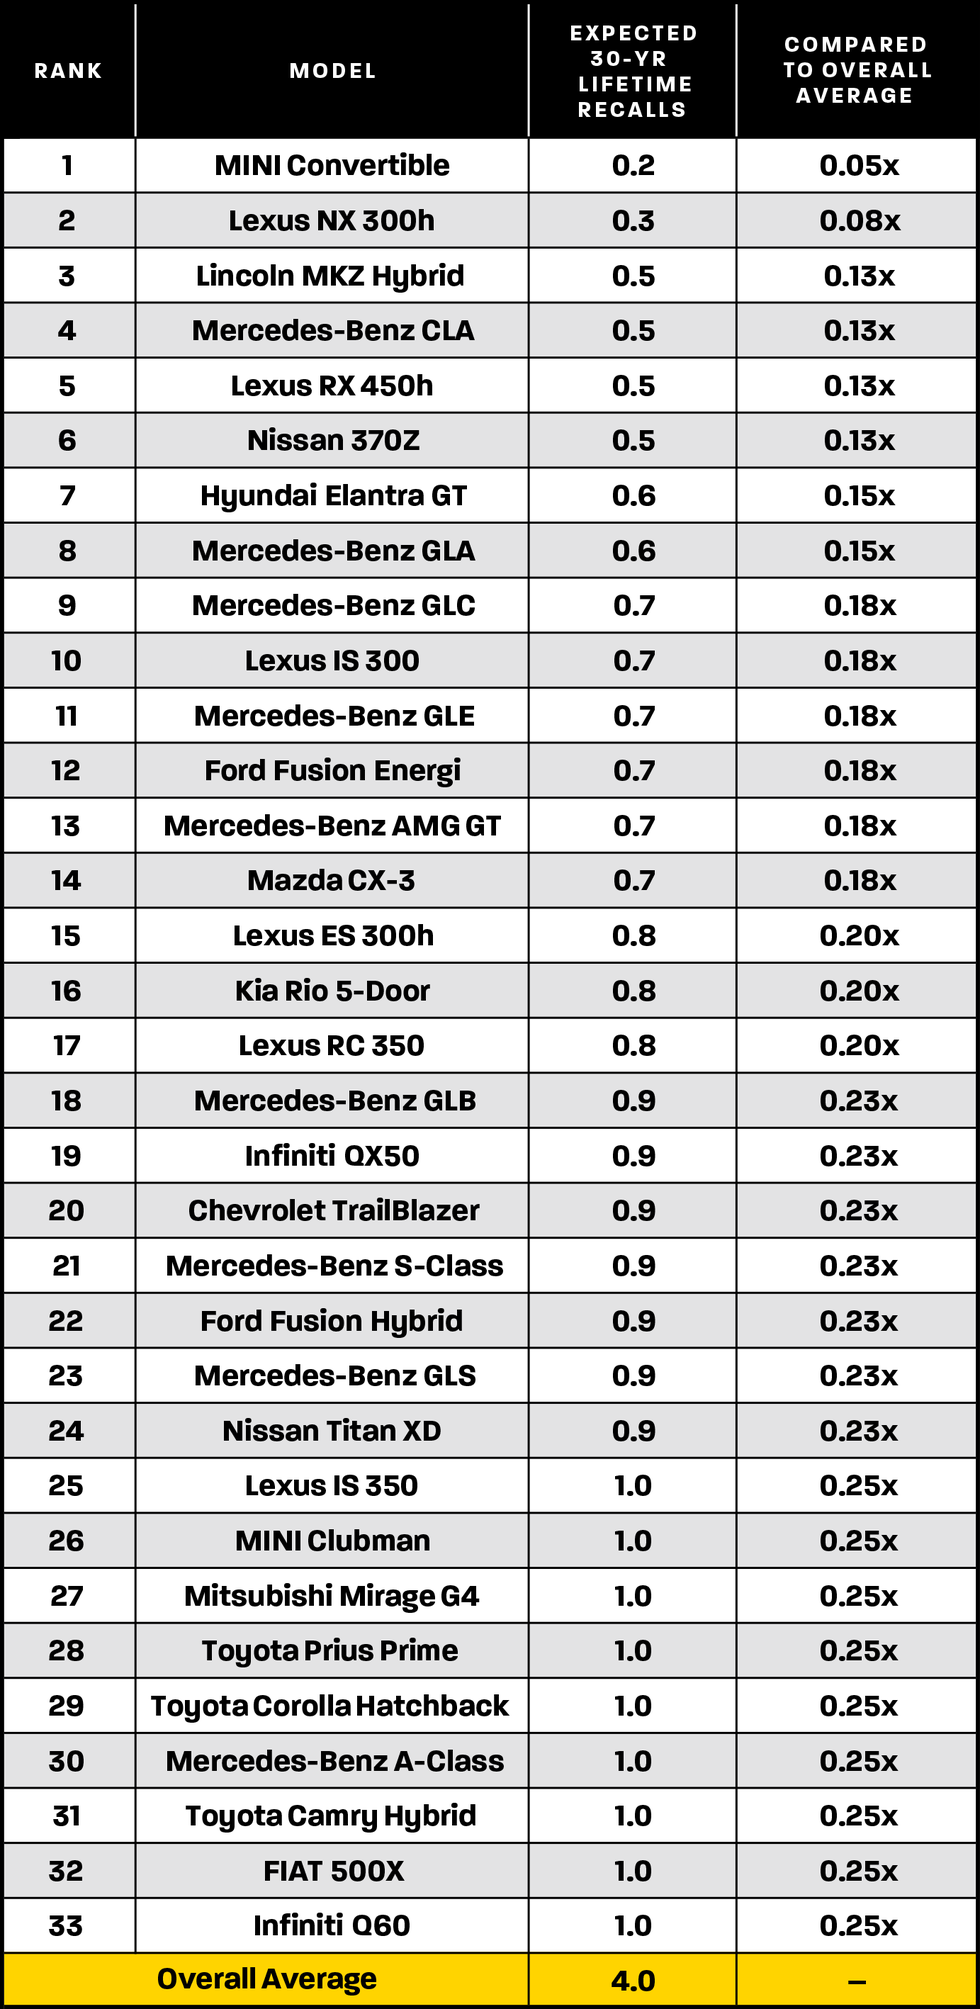 a table outlining the 33 most recalled vehicles